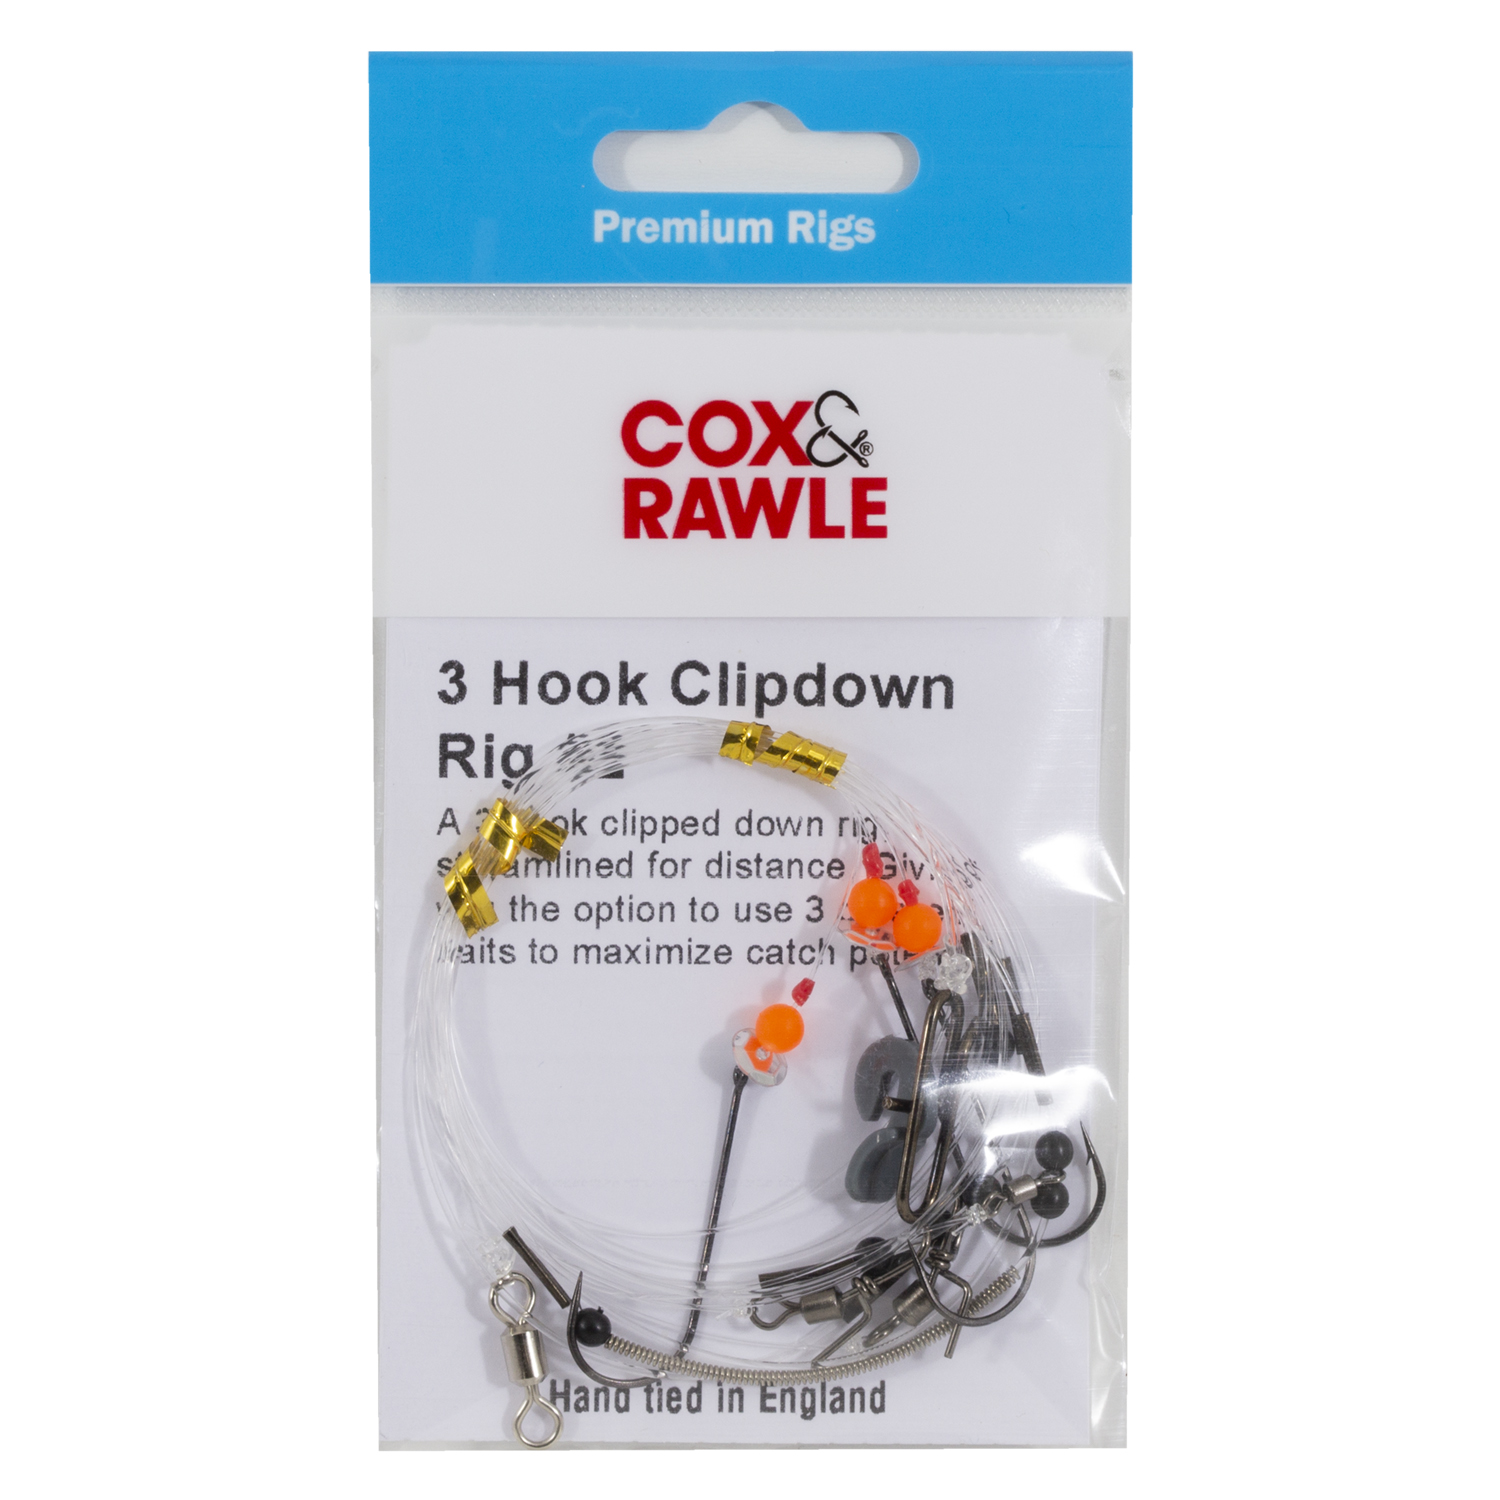 Cox & Rawle 3 Hook Clipdown Rig #2 - Veals Mail Order